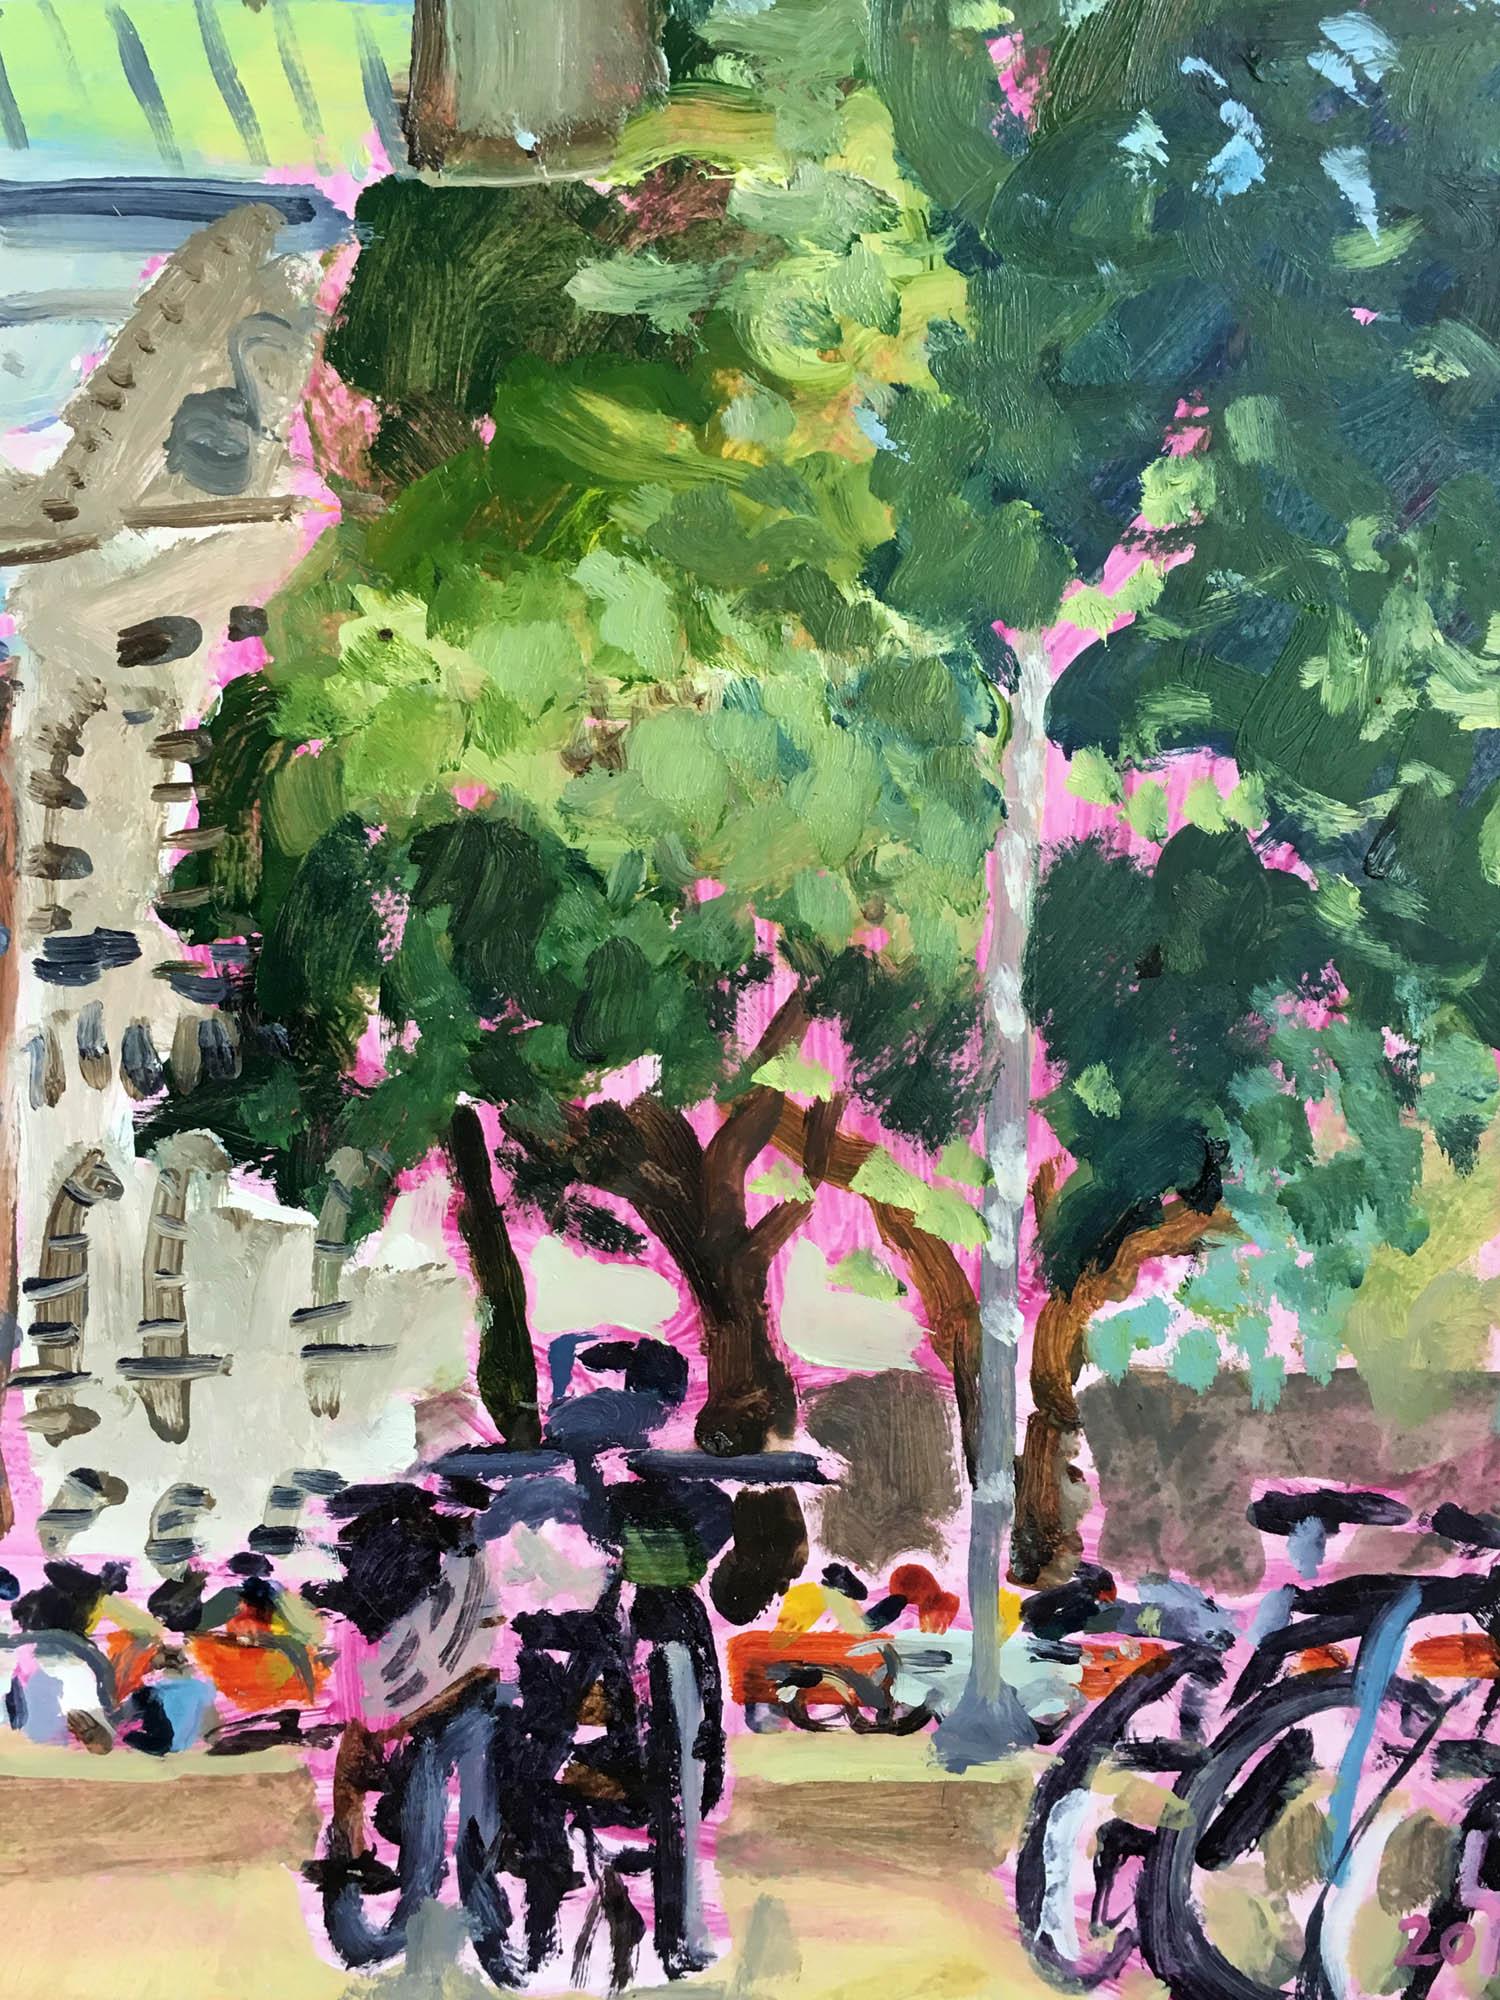 A Plein Air Outdoor Painting of the London Eye and Horse Guards Parade from St James Park London.
Painted by Lisa Takahashi on oil on board in July 2018, unframed, signed. 